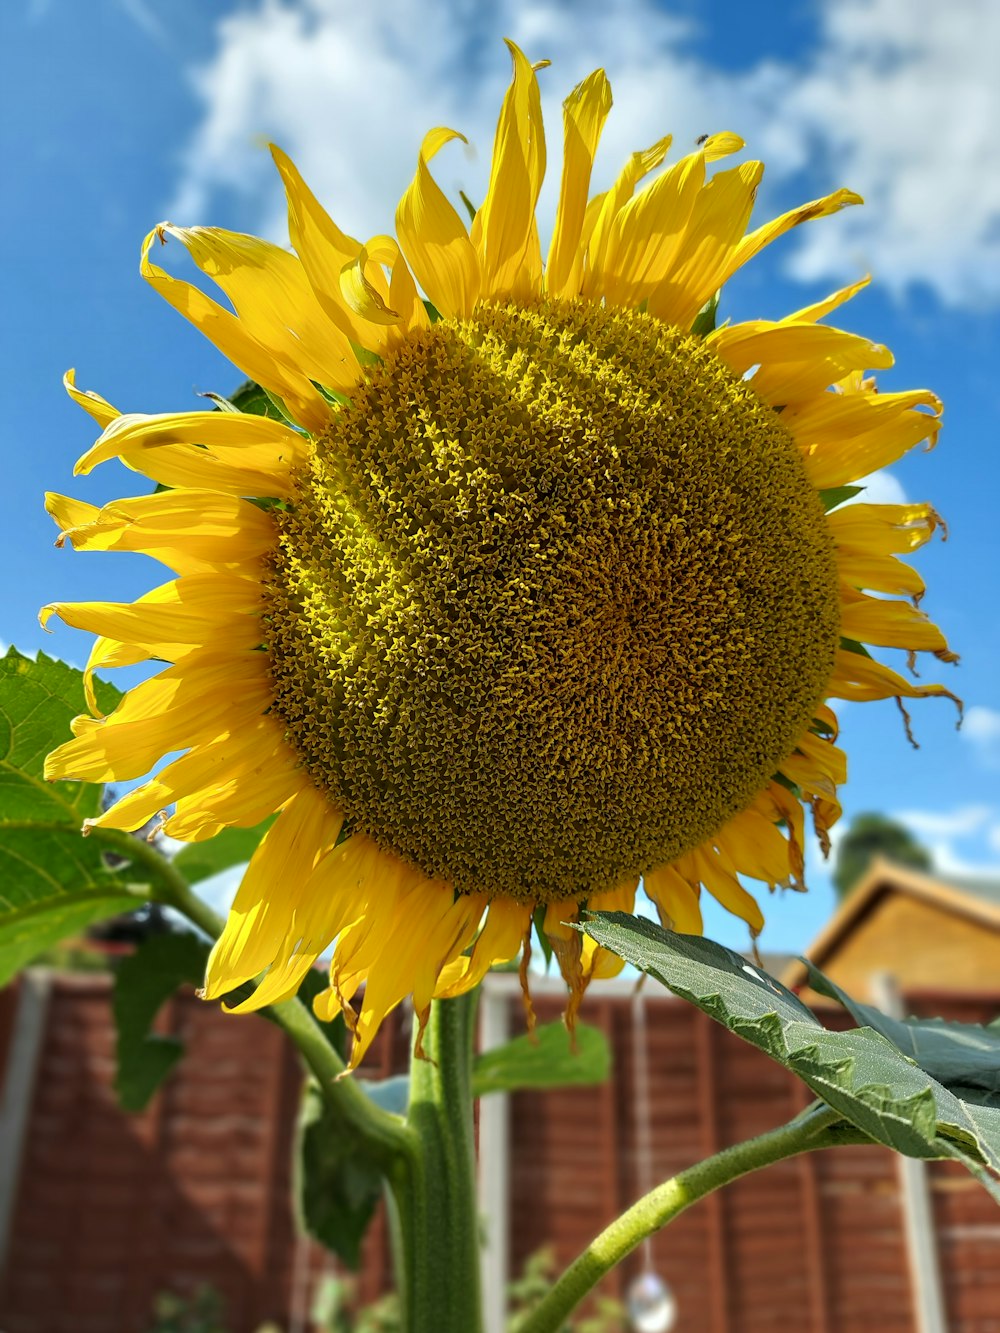 a sunflower with a large center